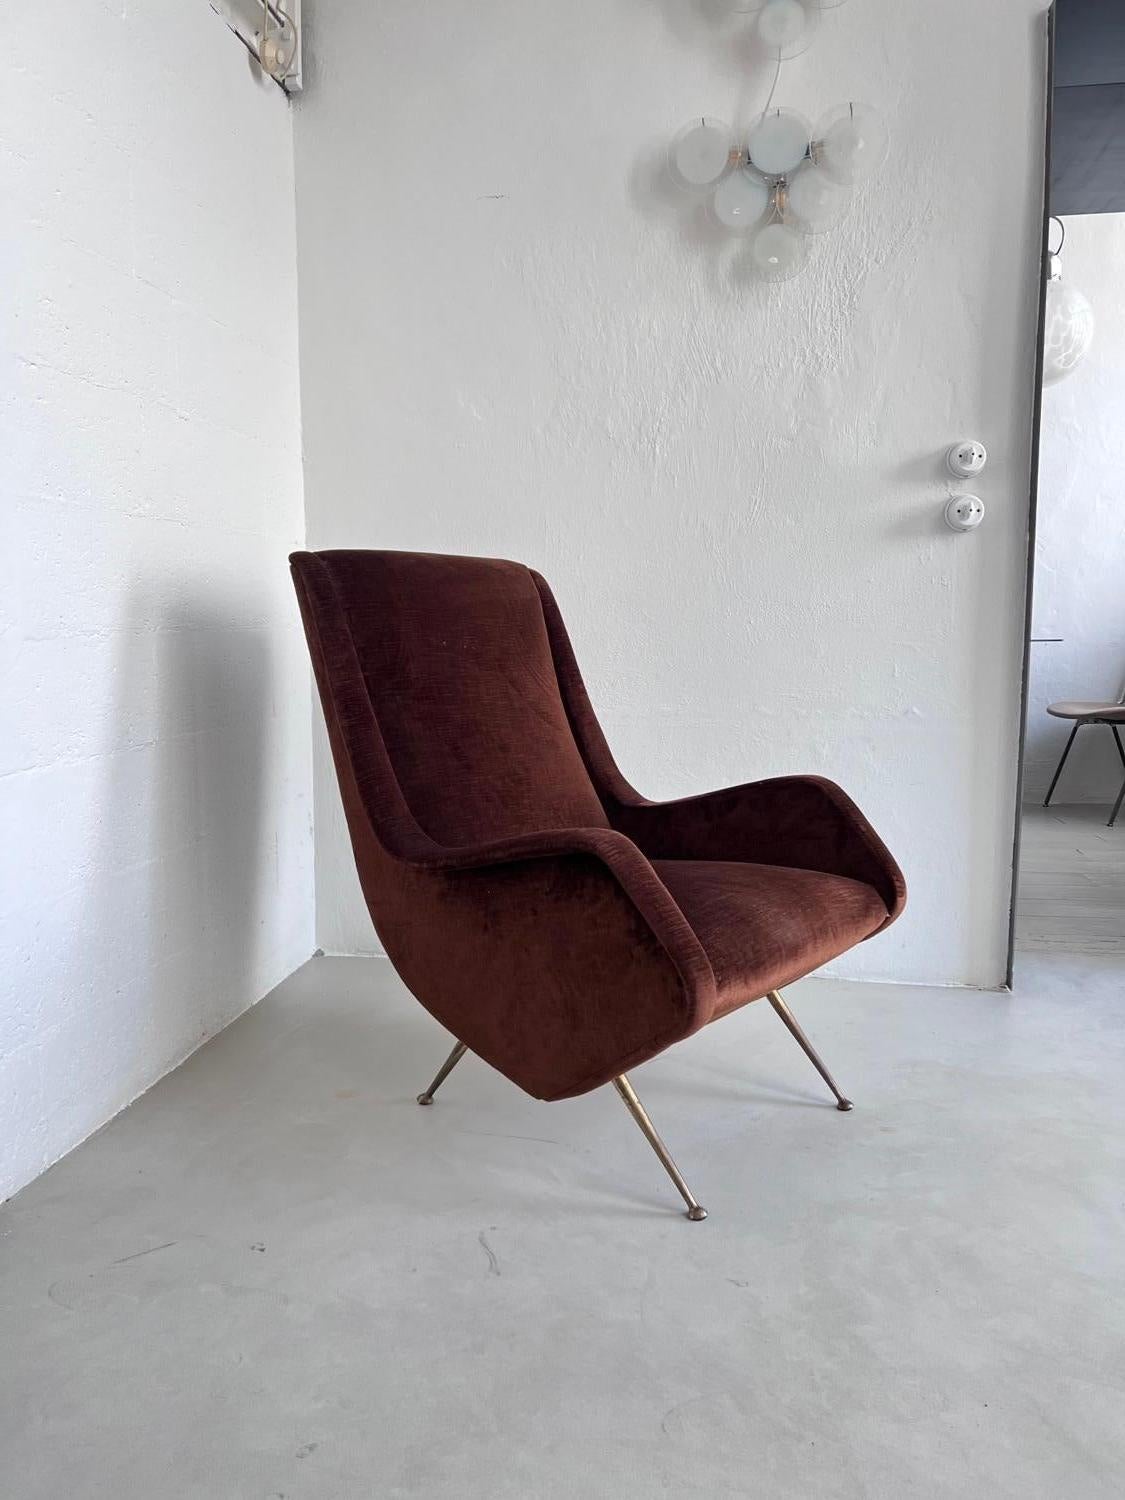 Italian Mid-Century Modern - MCM Velvet Armchairs - Sculptural Decorative Armchairs

Stunning set of two Italian Mid-Century Modern armchairs, designed by Aldo Morbelli for ISA Bergamo in the 1950s and upholstered in smooth brown velvet.

The chairs